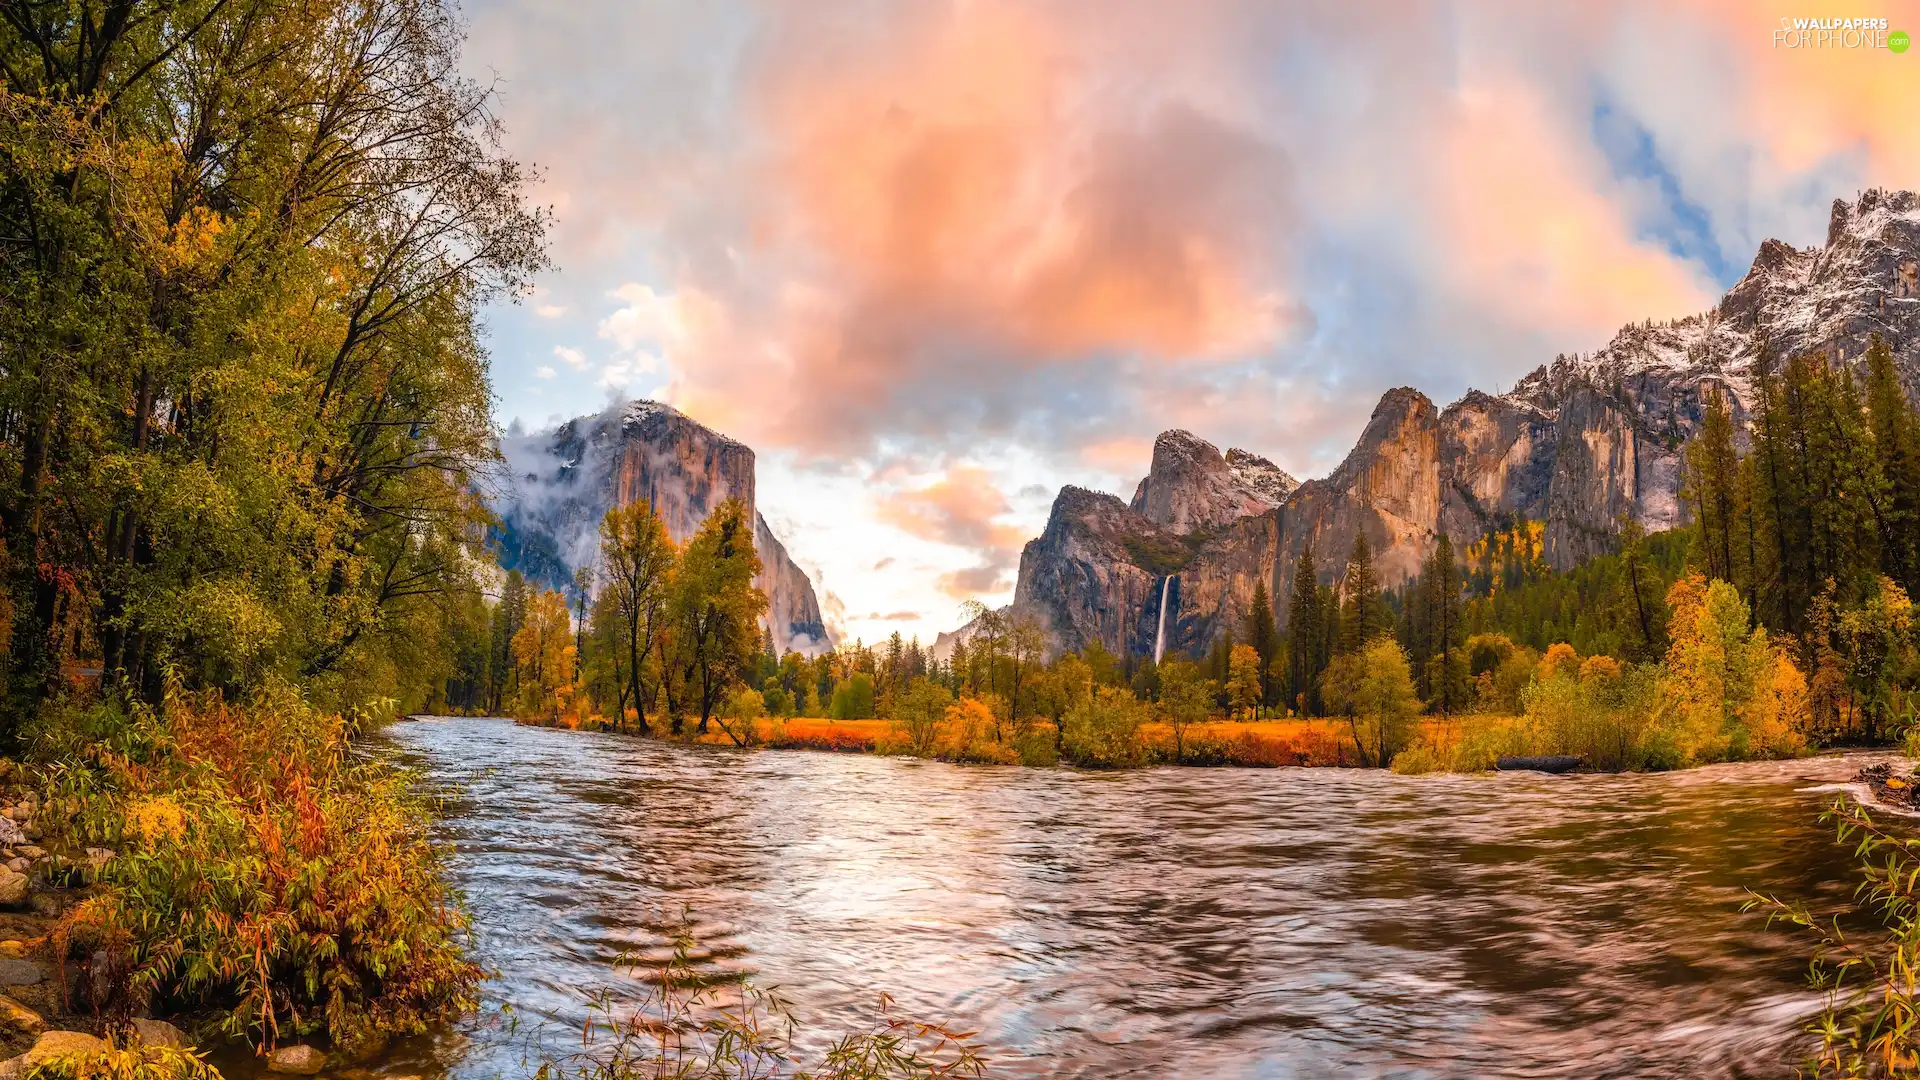 California, The United States, Yosemite National Park, Mountains, viewes, rocks, autumn, trees, River